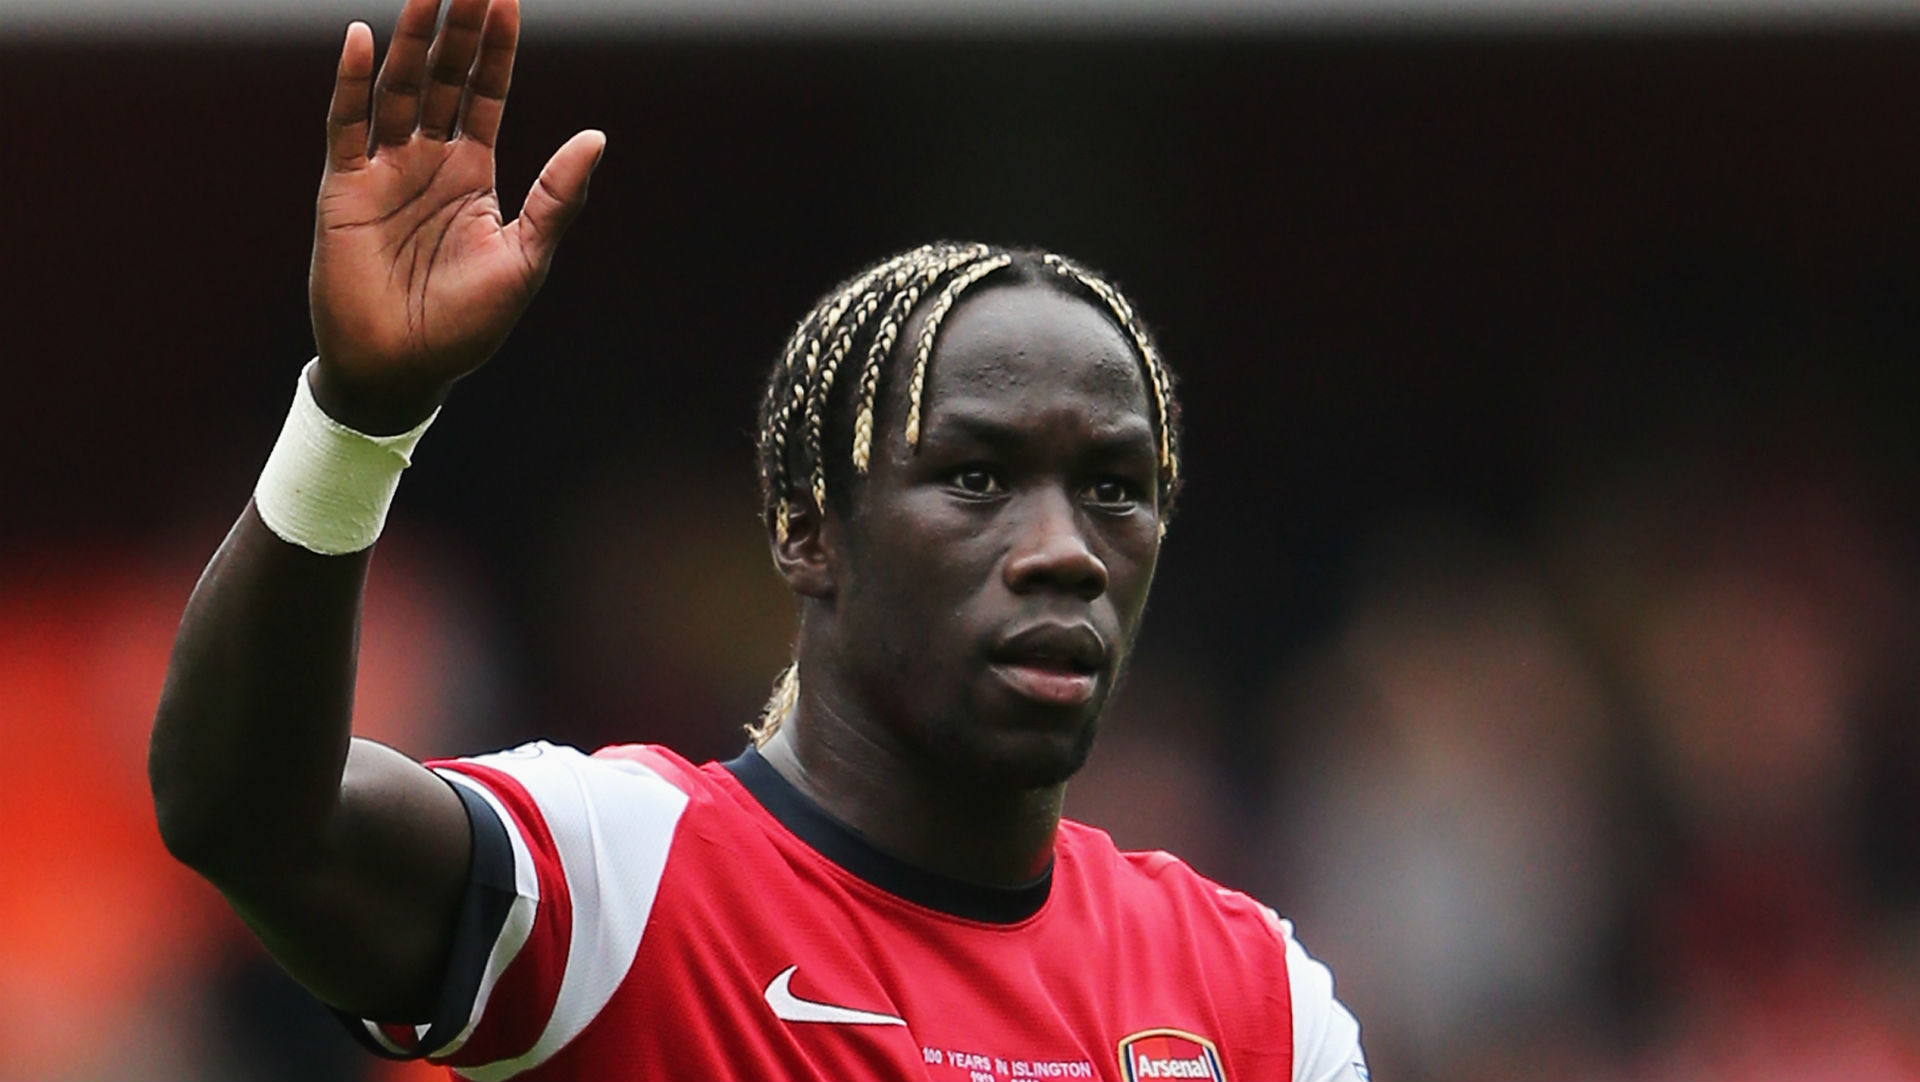 'I believe we under-evaluated ourselves' - Sagna says poor self-esteem cost Arsenal trophies